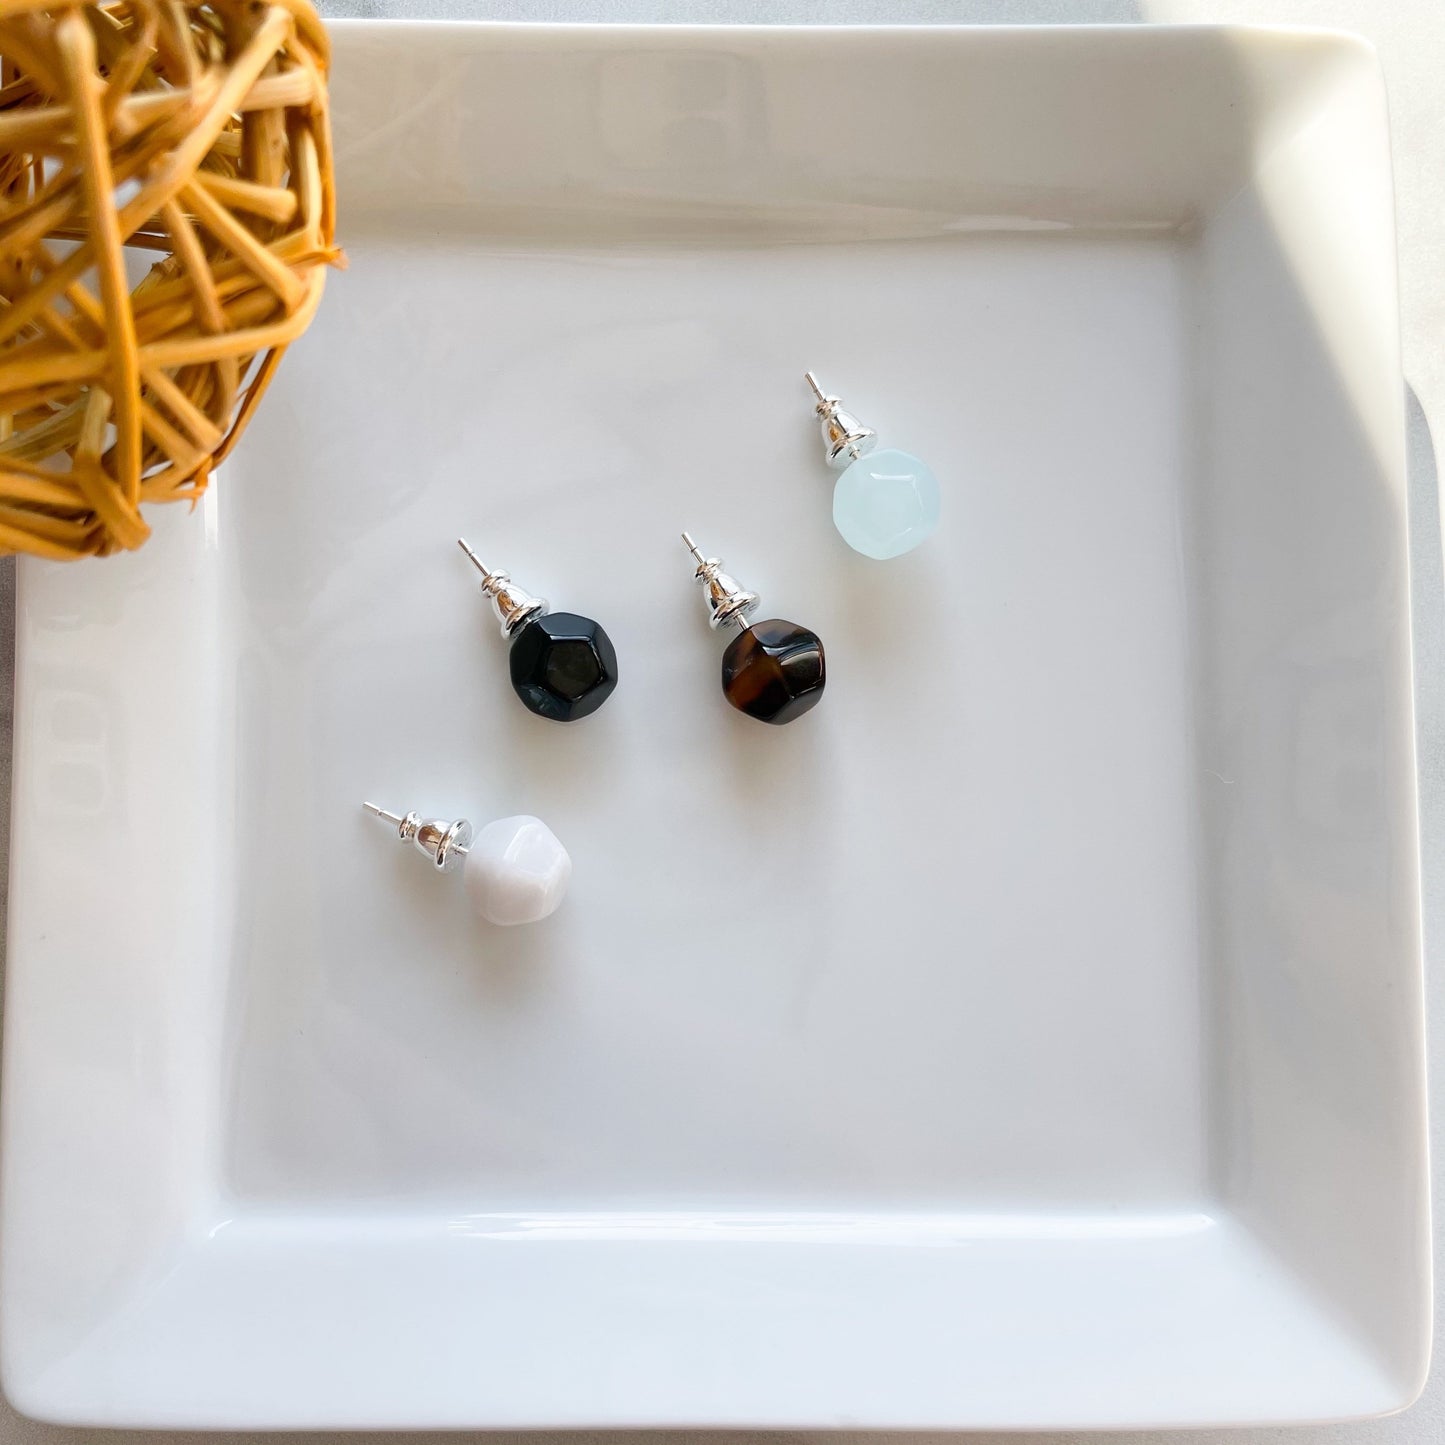 Kaleidoscope Studs In Tortoise, Shell, Black Pearl and White Jade Small Circle Sphere Ball Stud Earrings 925 Sterling Silver Posts